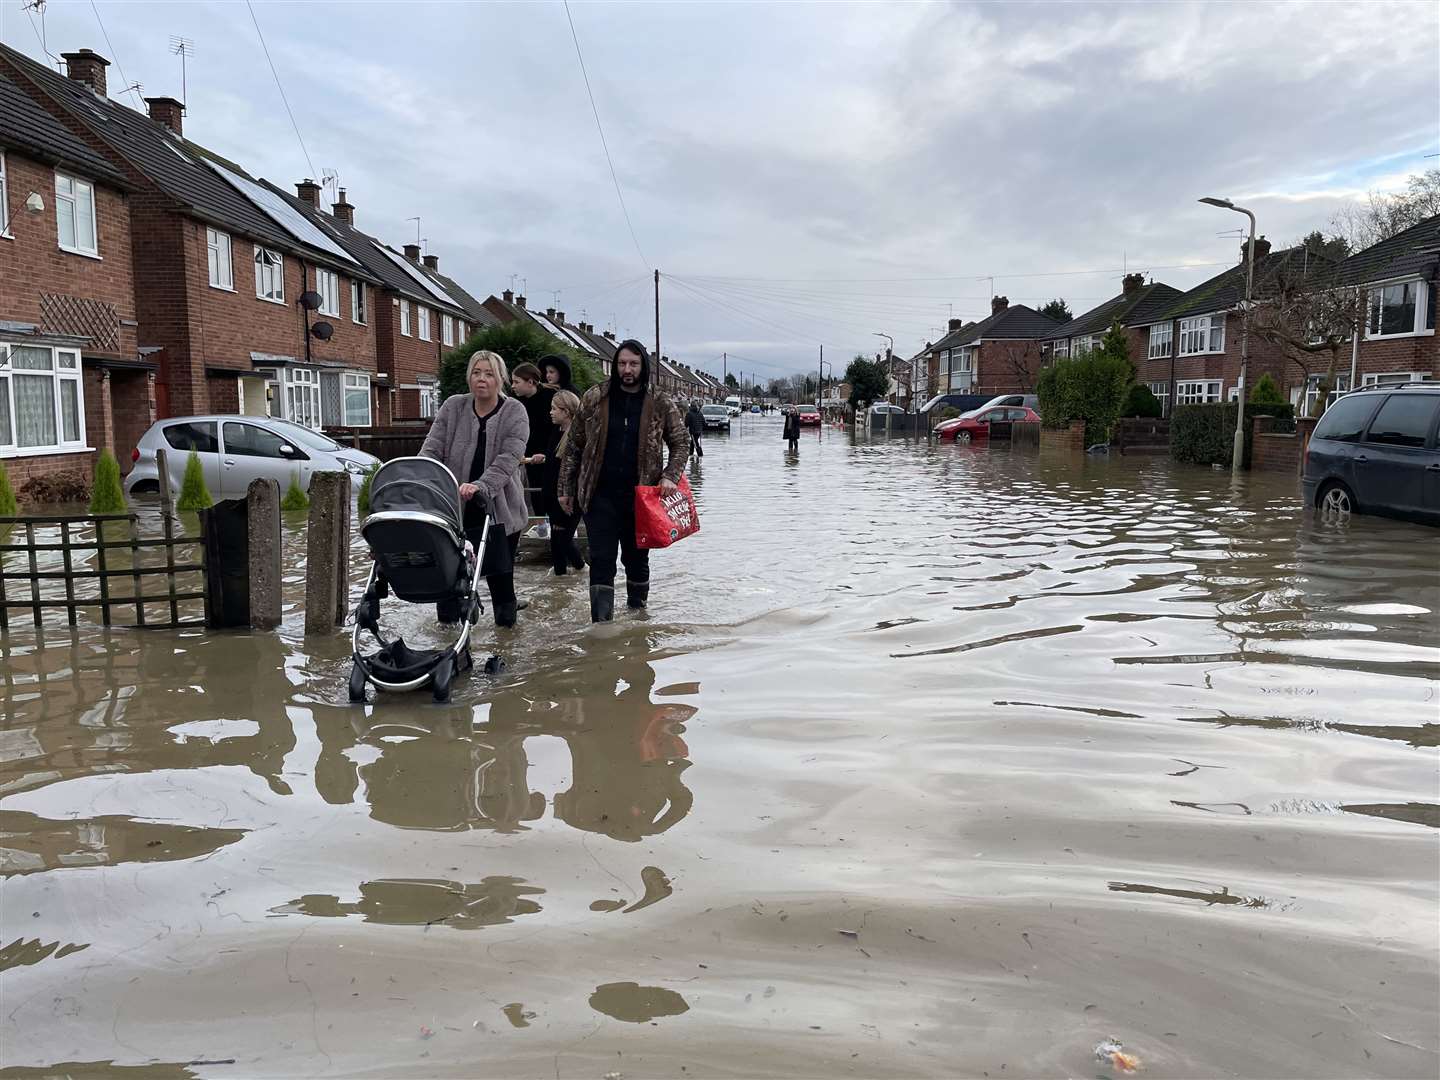 Residents wade through flood water in Loughborough, Leicestershire (Callum Parke/PA)